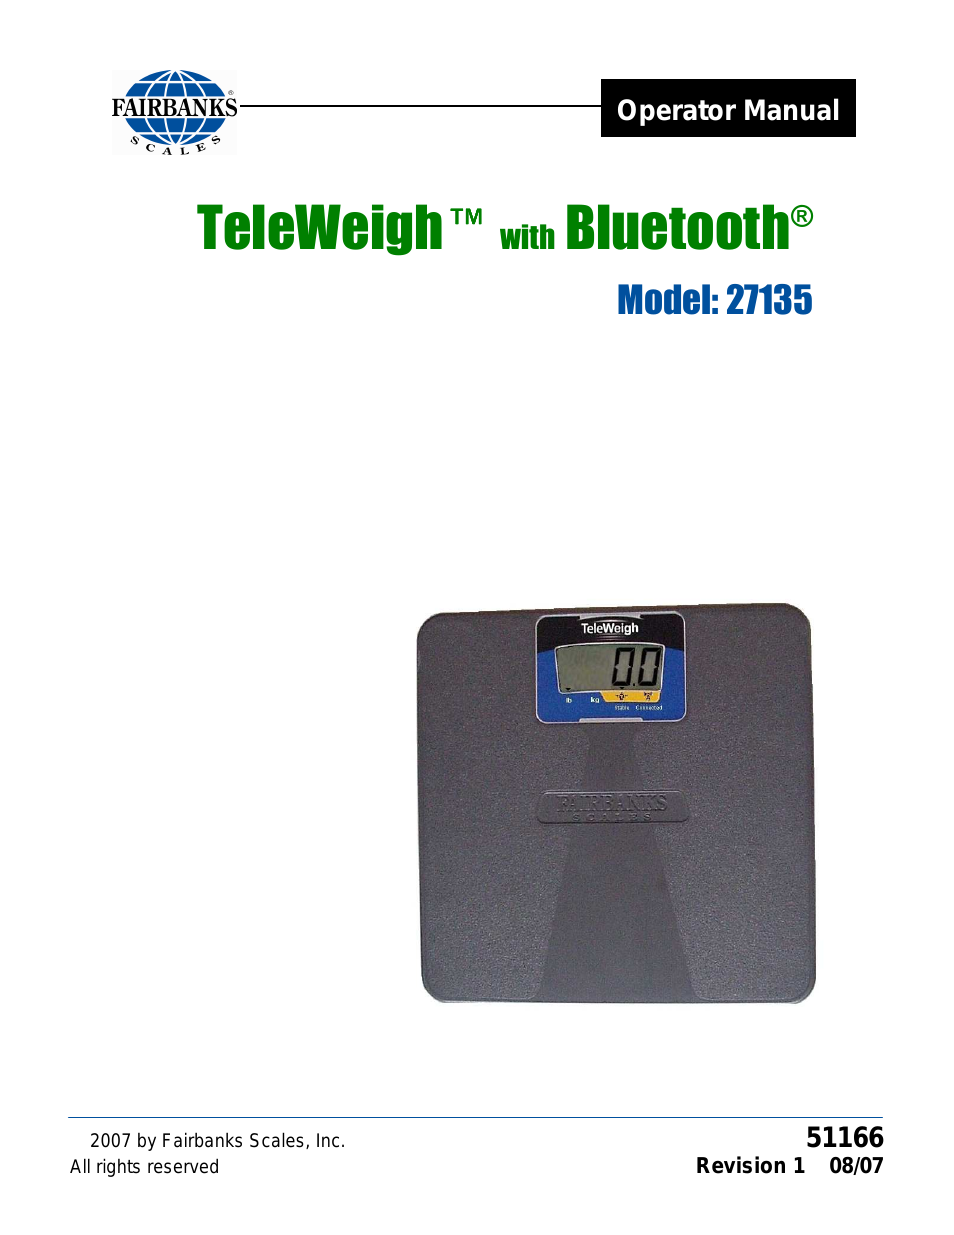 27135 TeleWeigh with Bluetooth